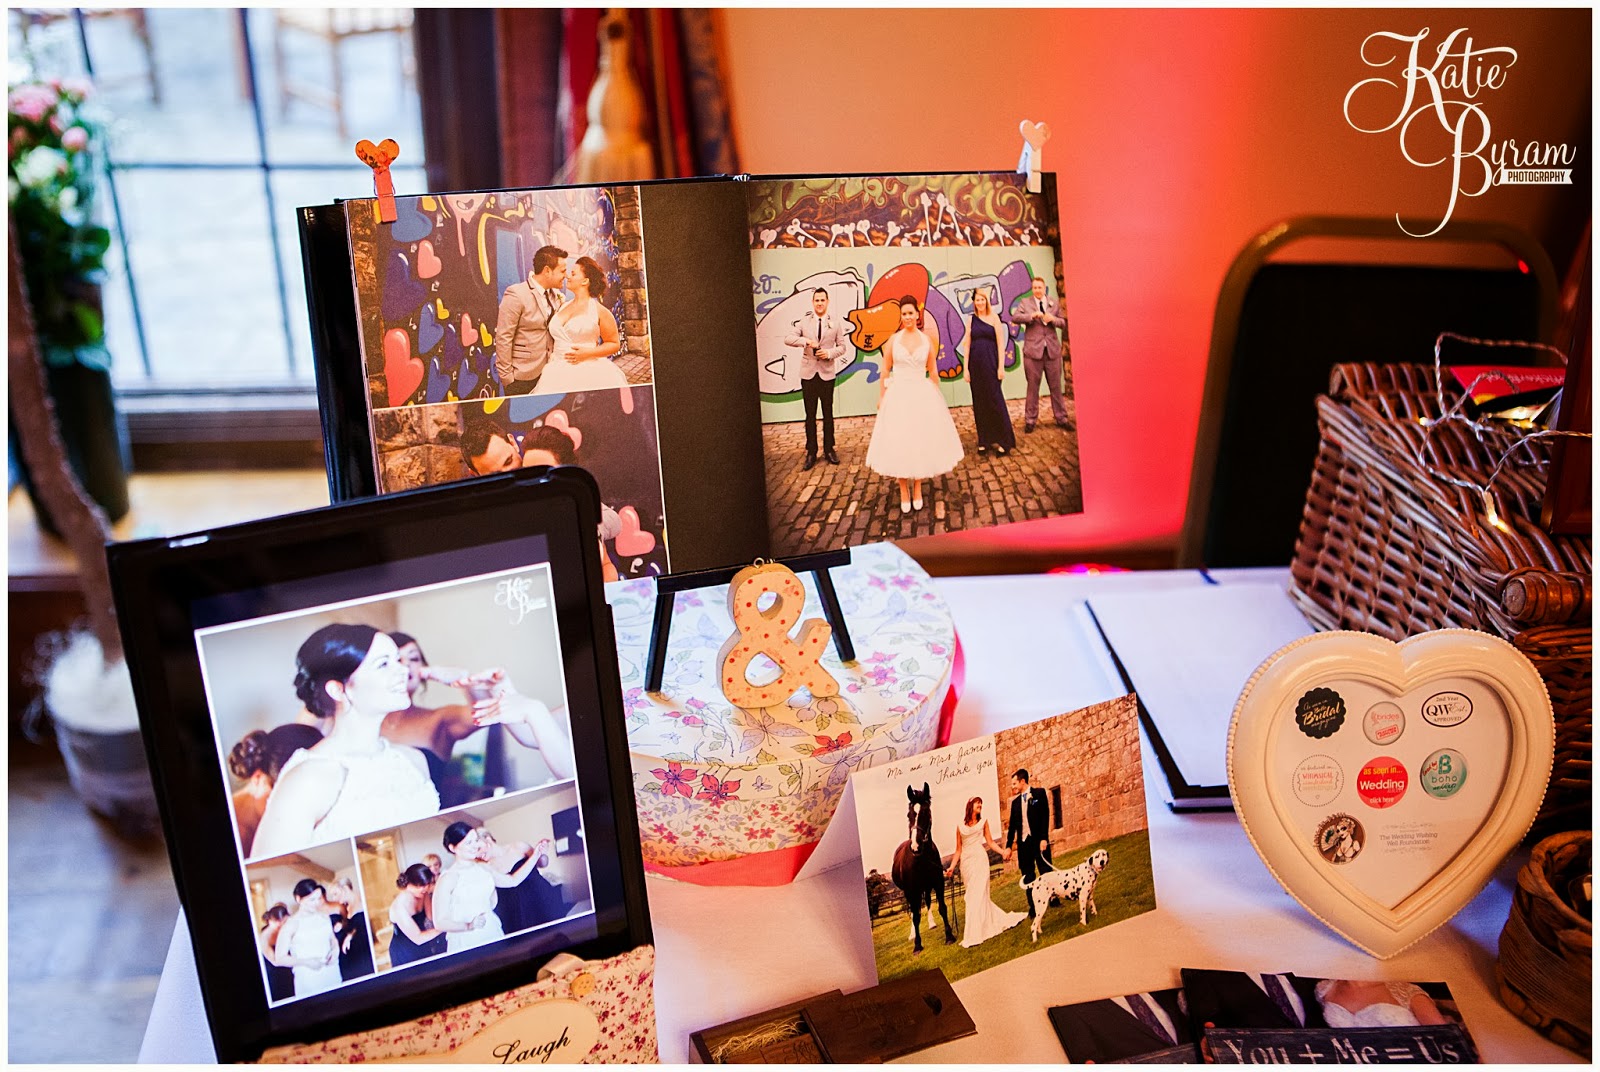 kirkley hall wedding fair, kirkley hall wedding, kirkley hall wedding showcase, katie byram photography, by wendy stationery, floral quarter, mark deeks music, northumberland wedding venue, 